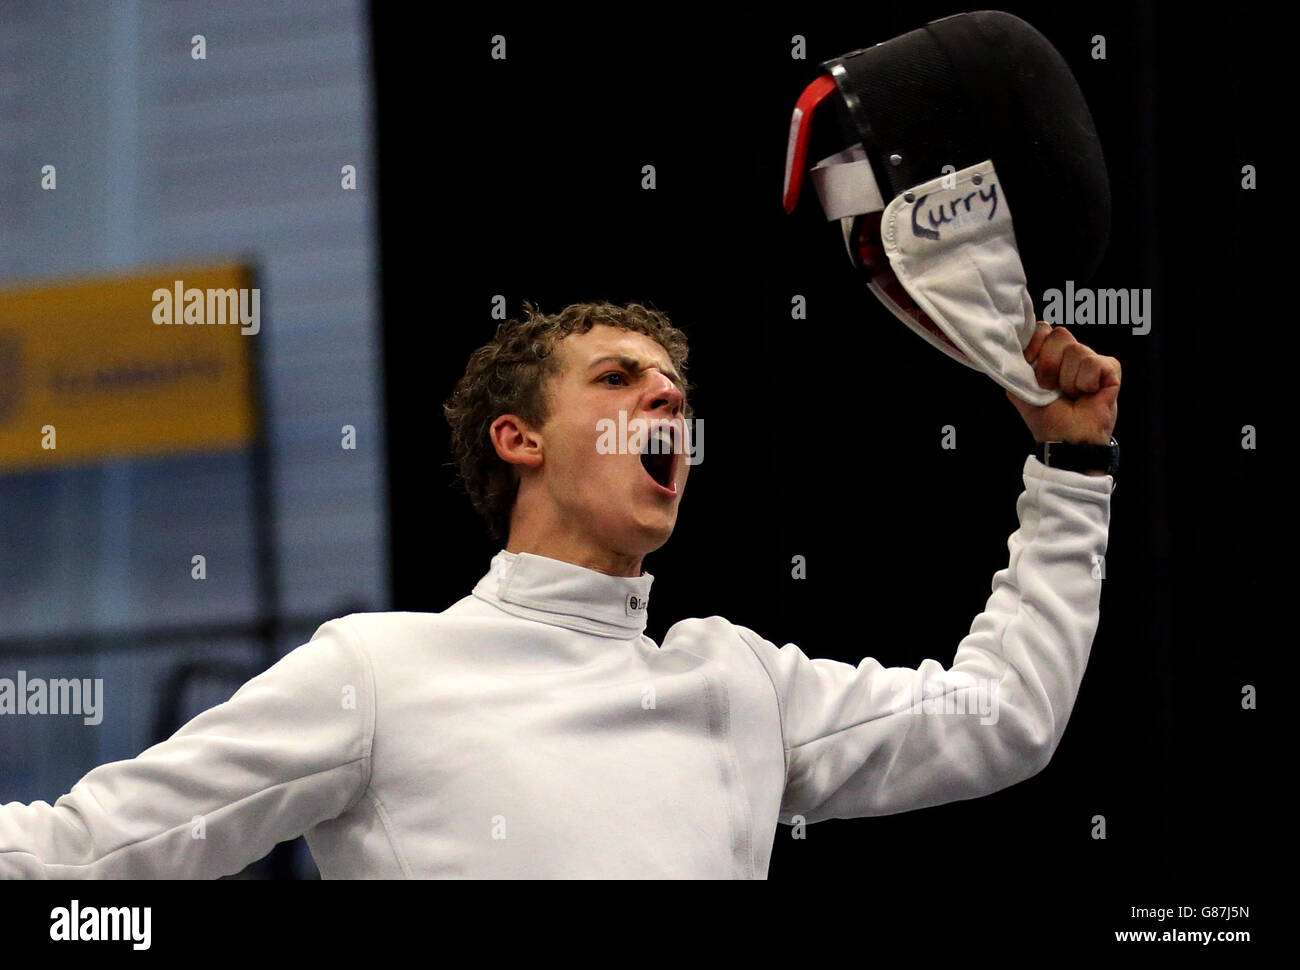 Great Britain's Sam Curry celebrates a win in the Fencing during day two of the European Modern Pentathlon Championships at the University of Bath. Stock Photo